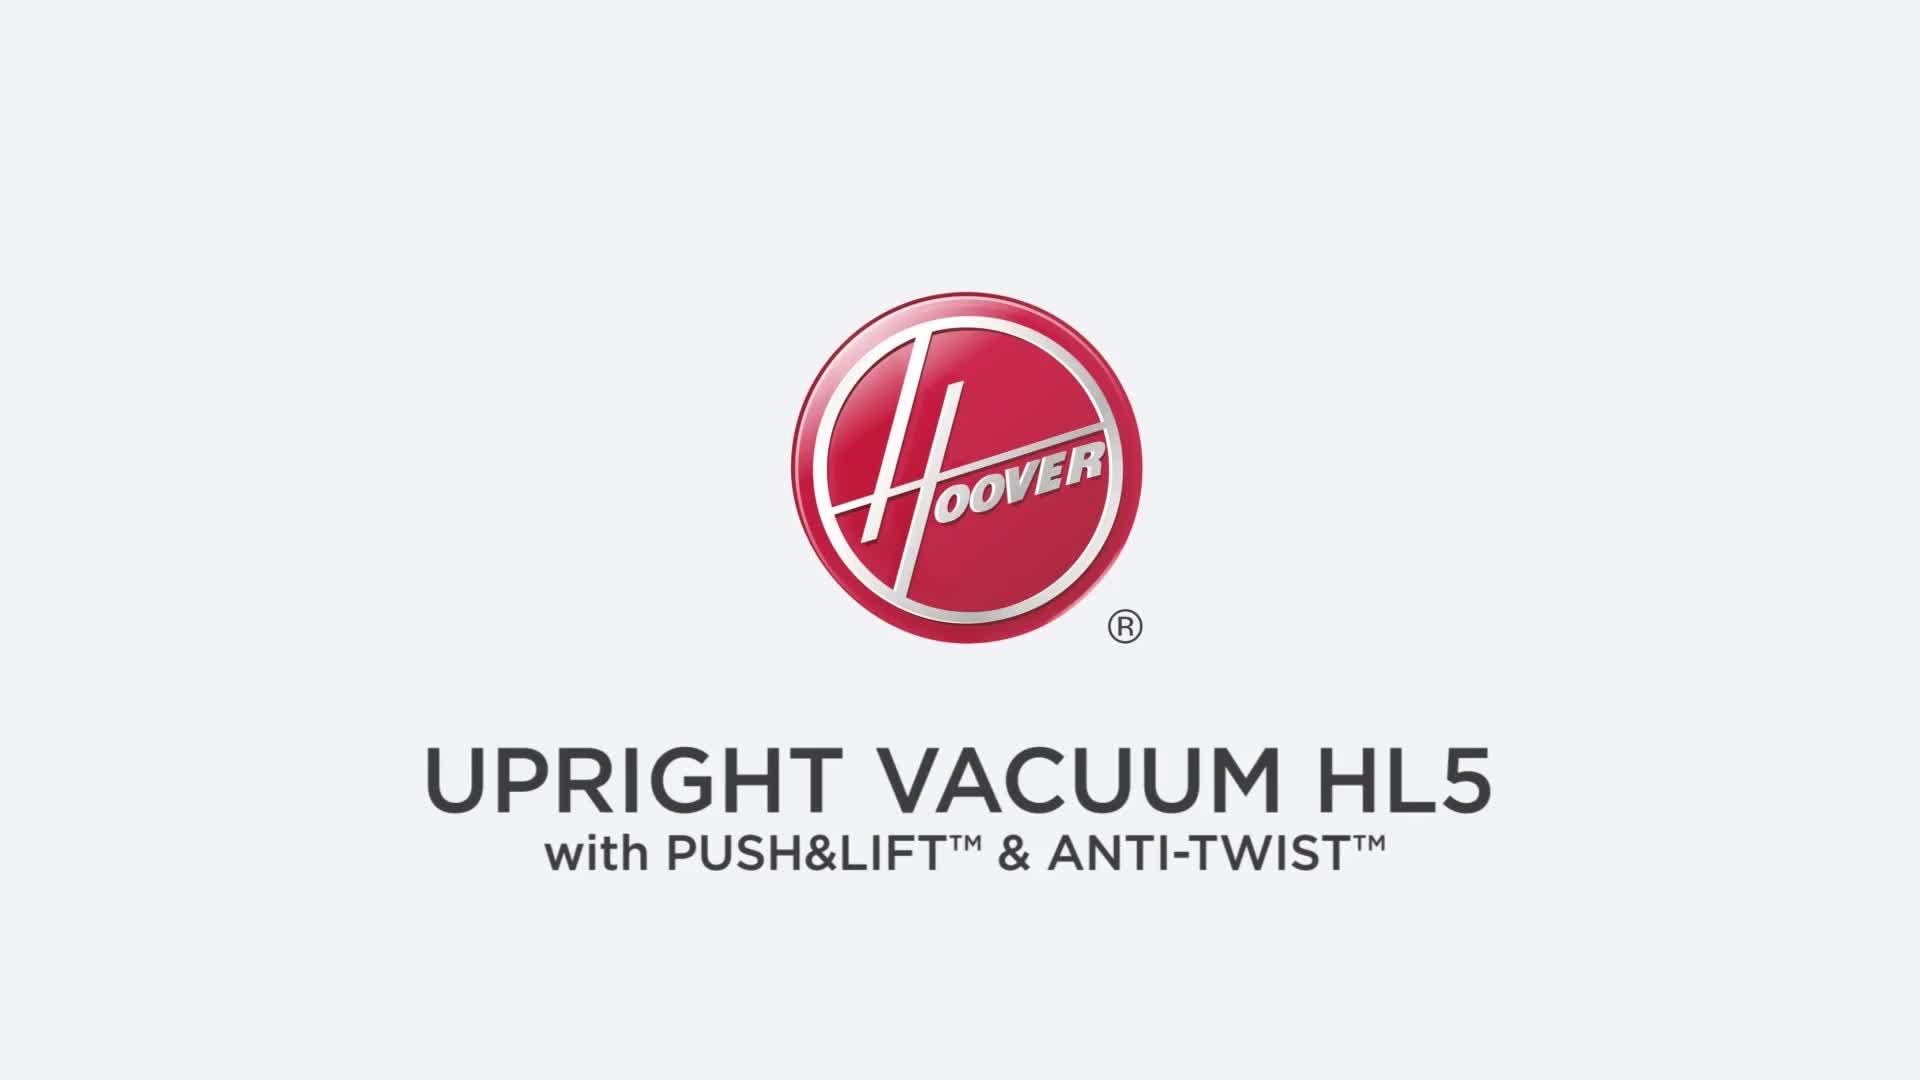 Hoover Upright Pet Vacuum Cleaner with ANTI-TWIST™ & PUSH&LIFT